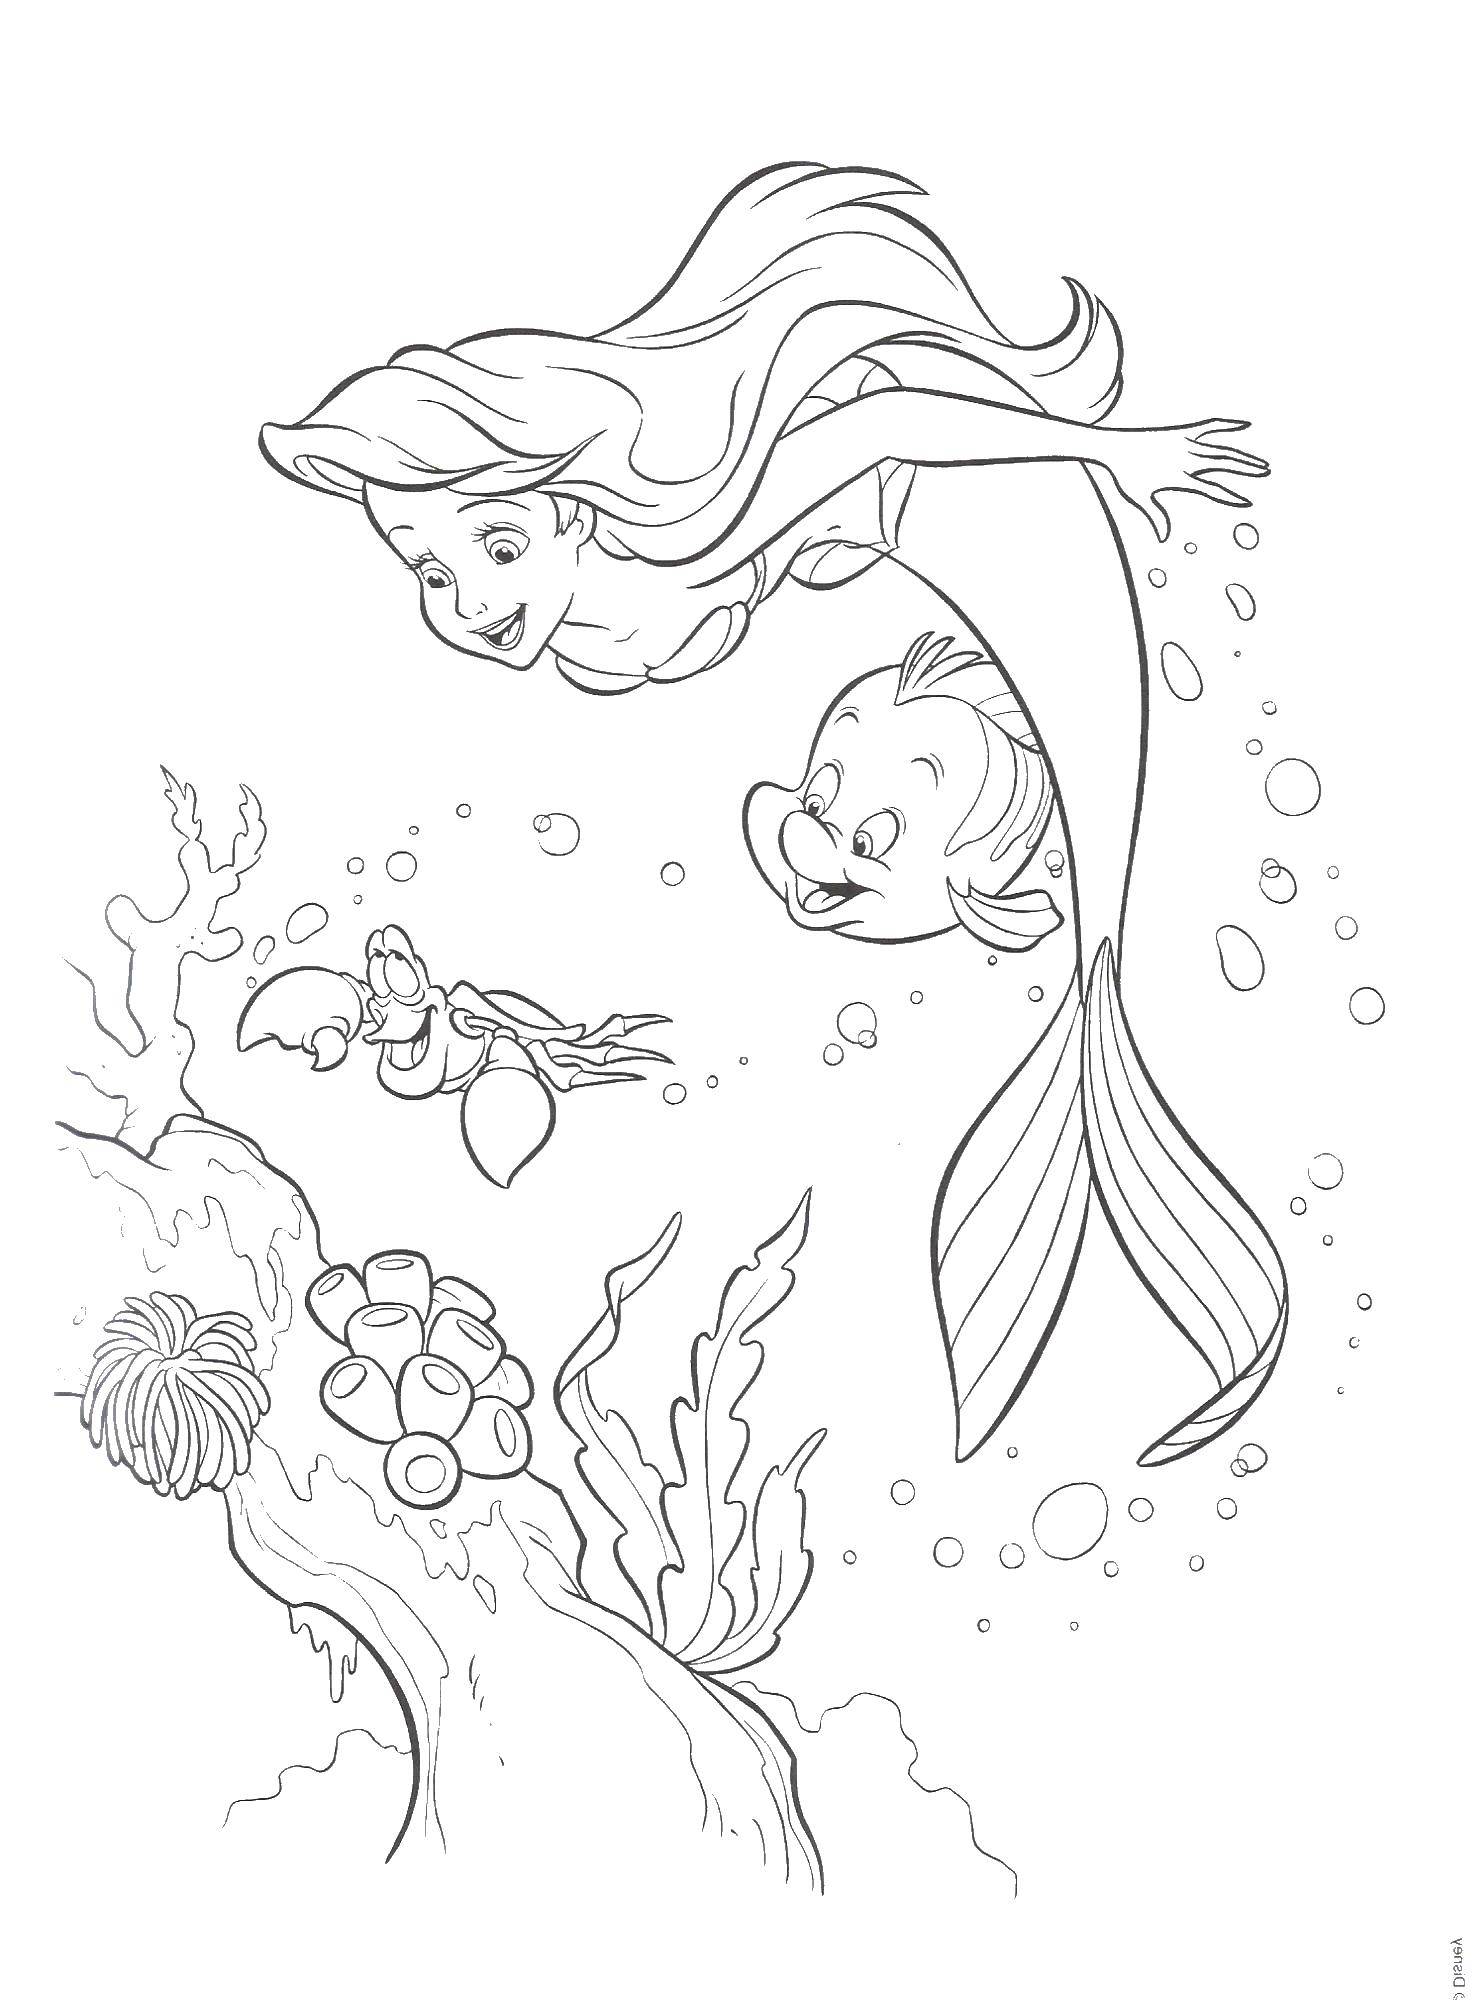 Coloring Ariel and flounder the fish. Category Disney cartoons. Tags:  Ariel, mermaid.